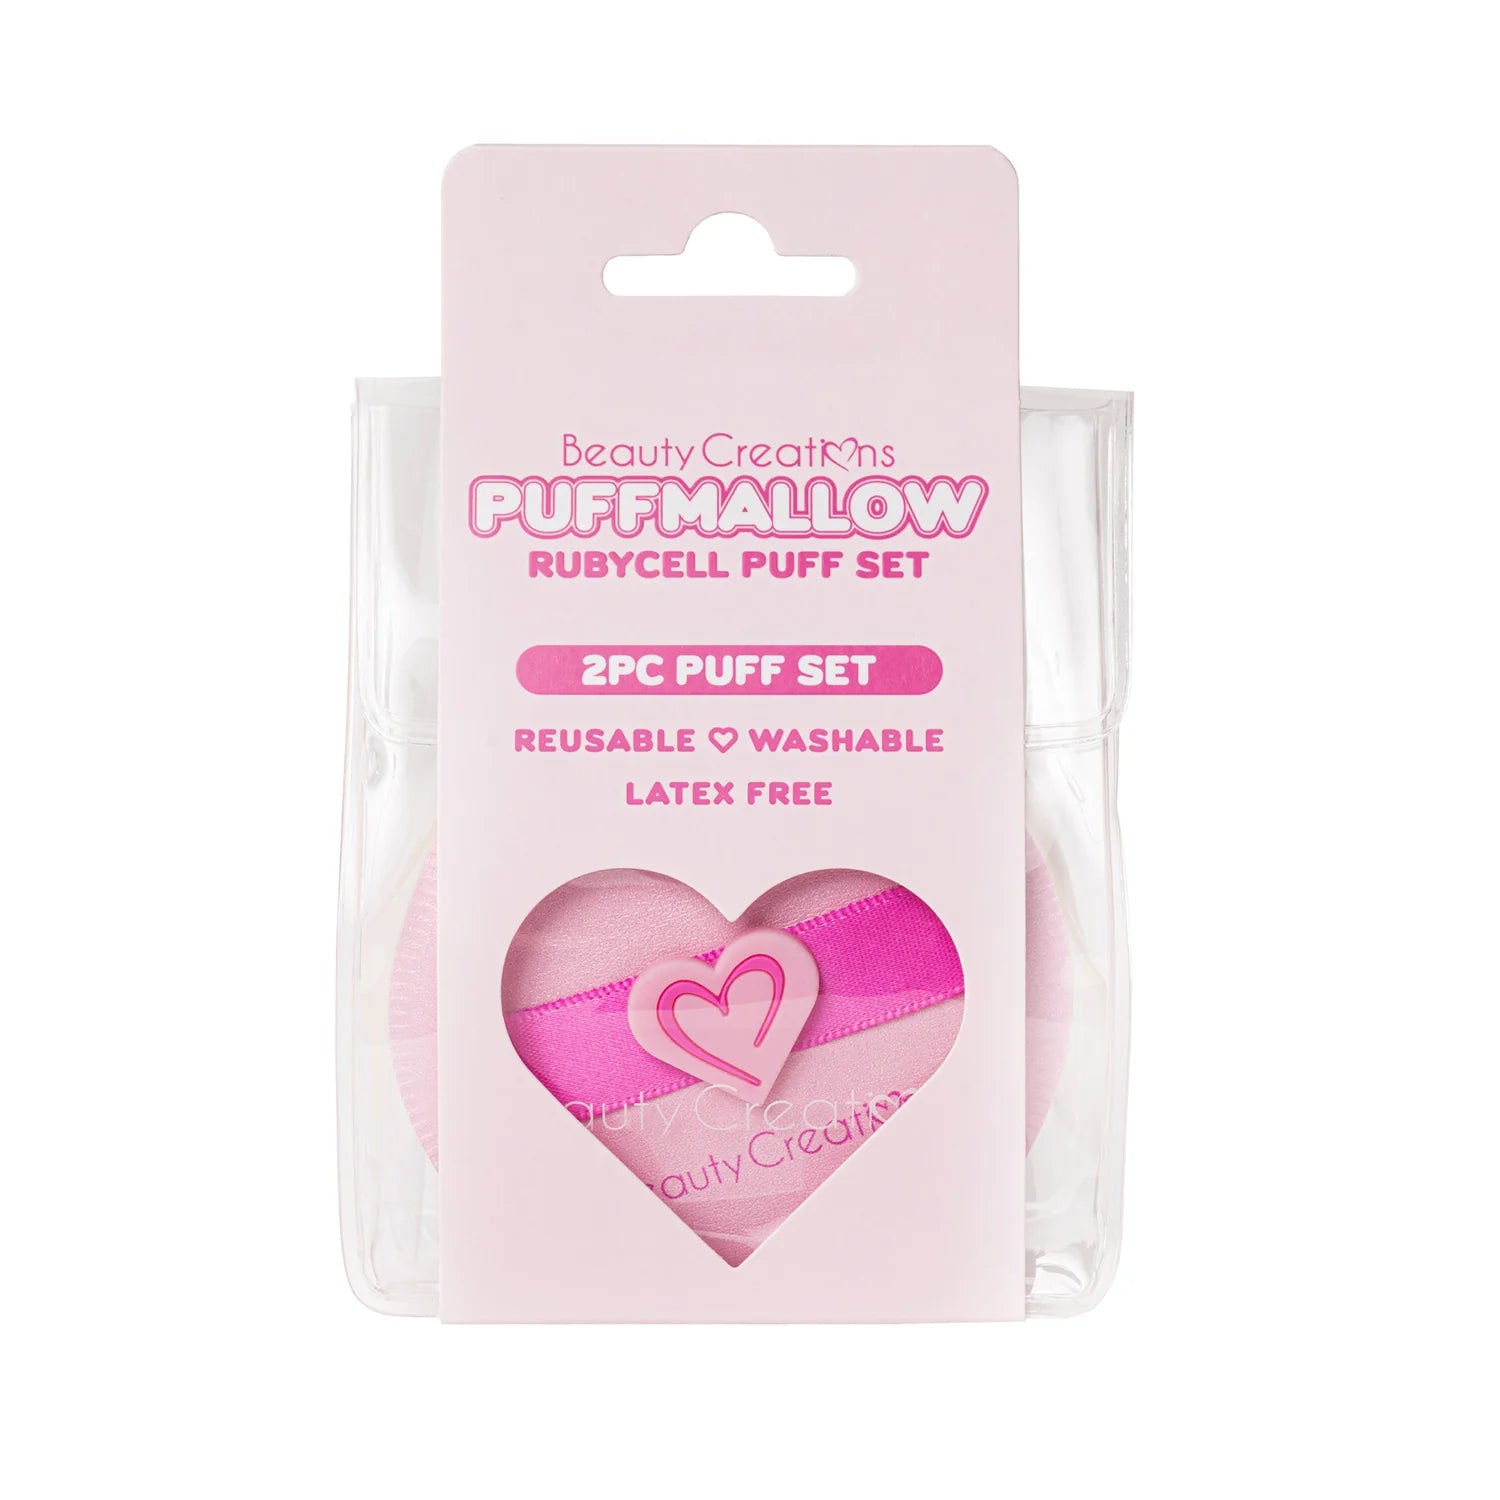 Beauty Creations - Puffmallow